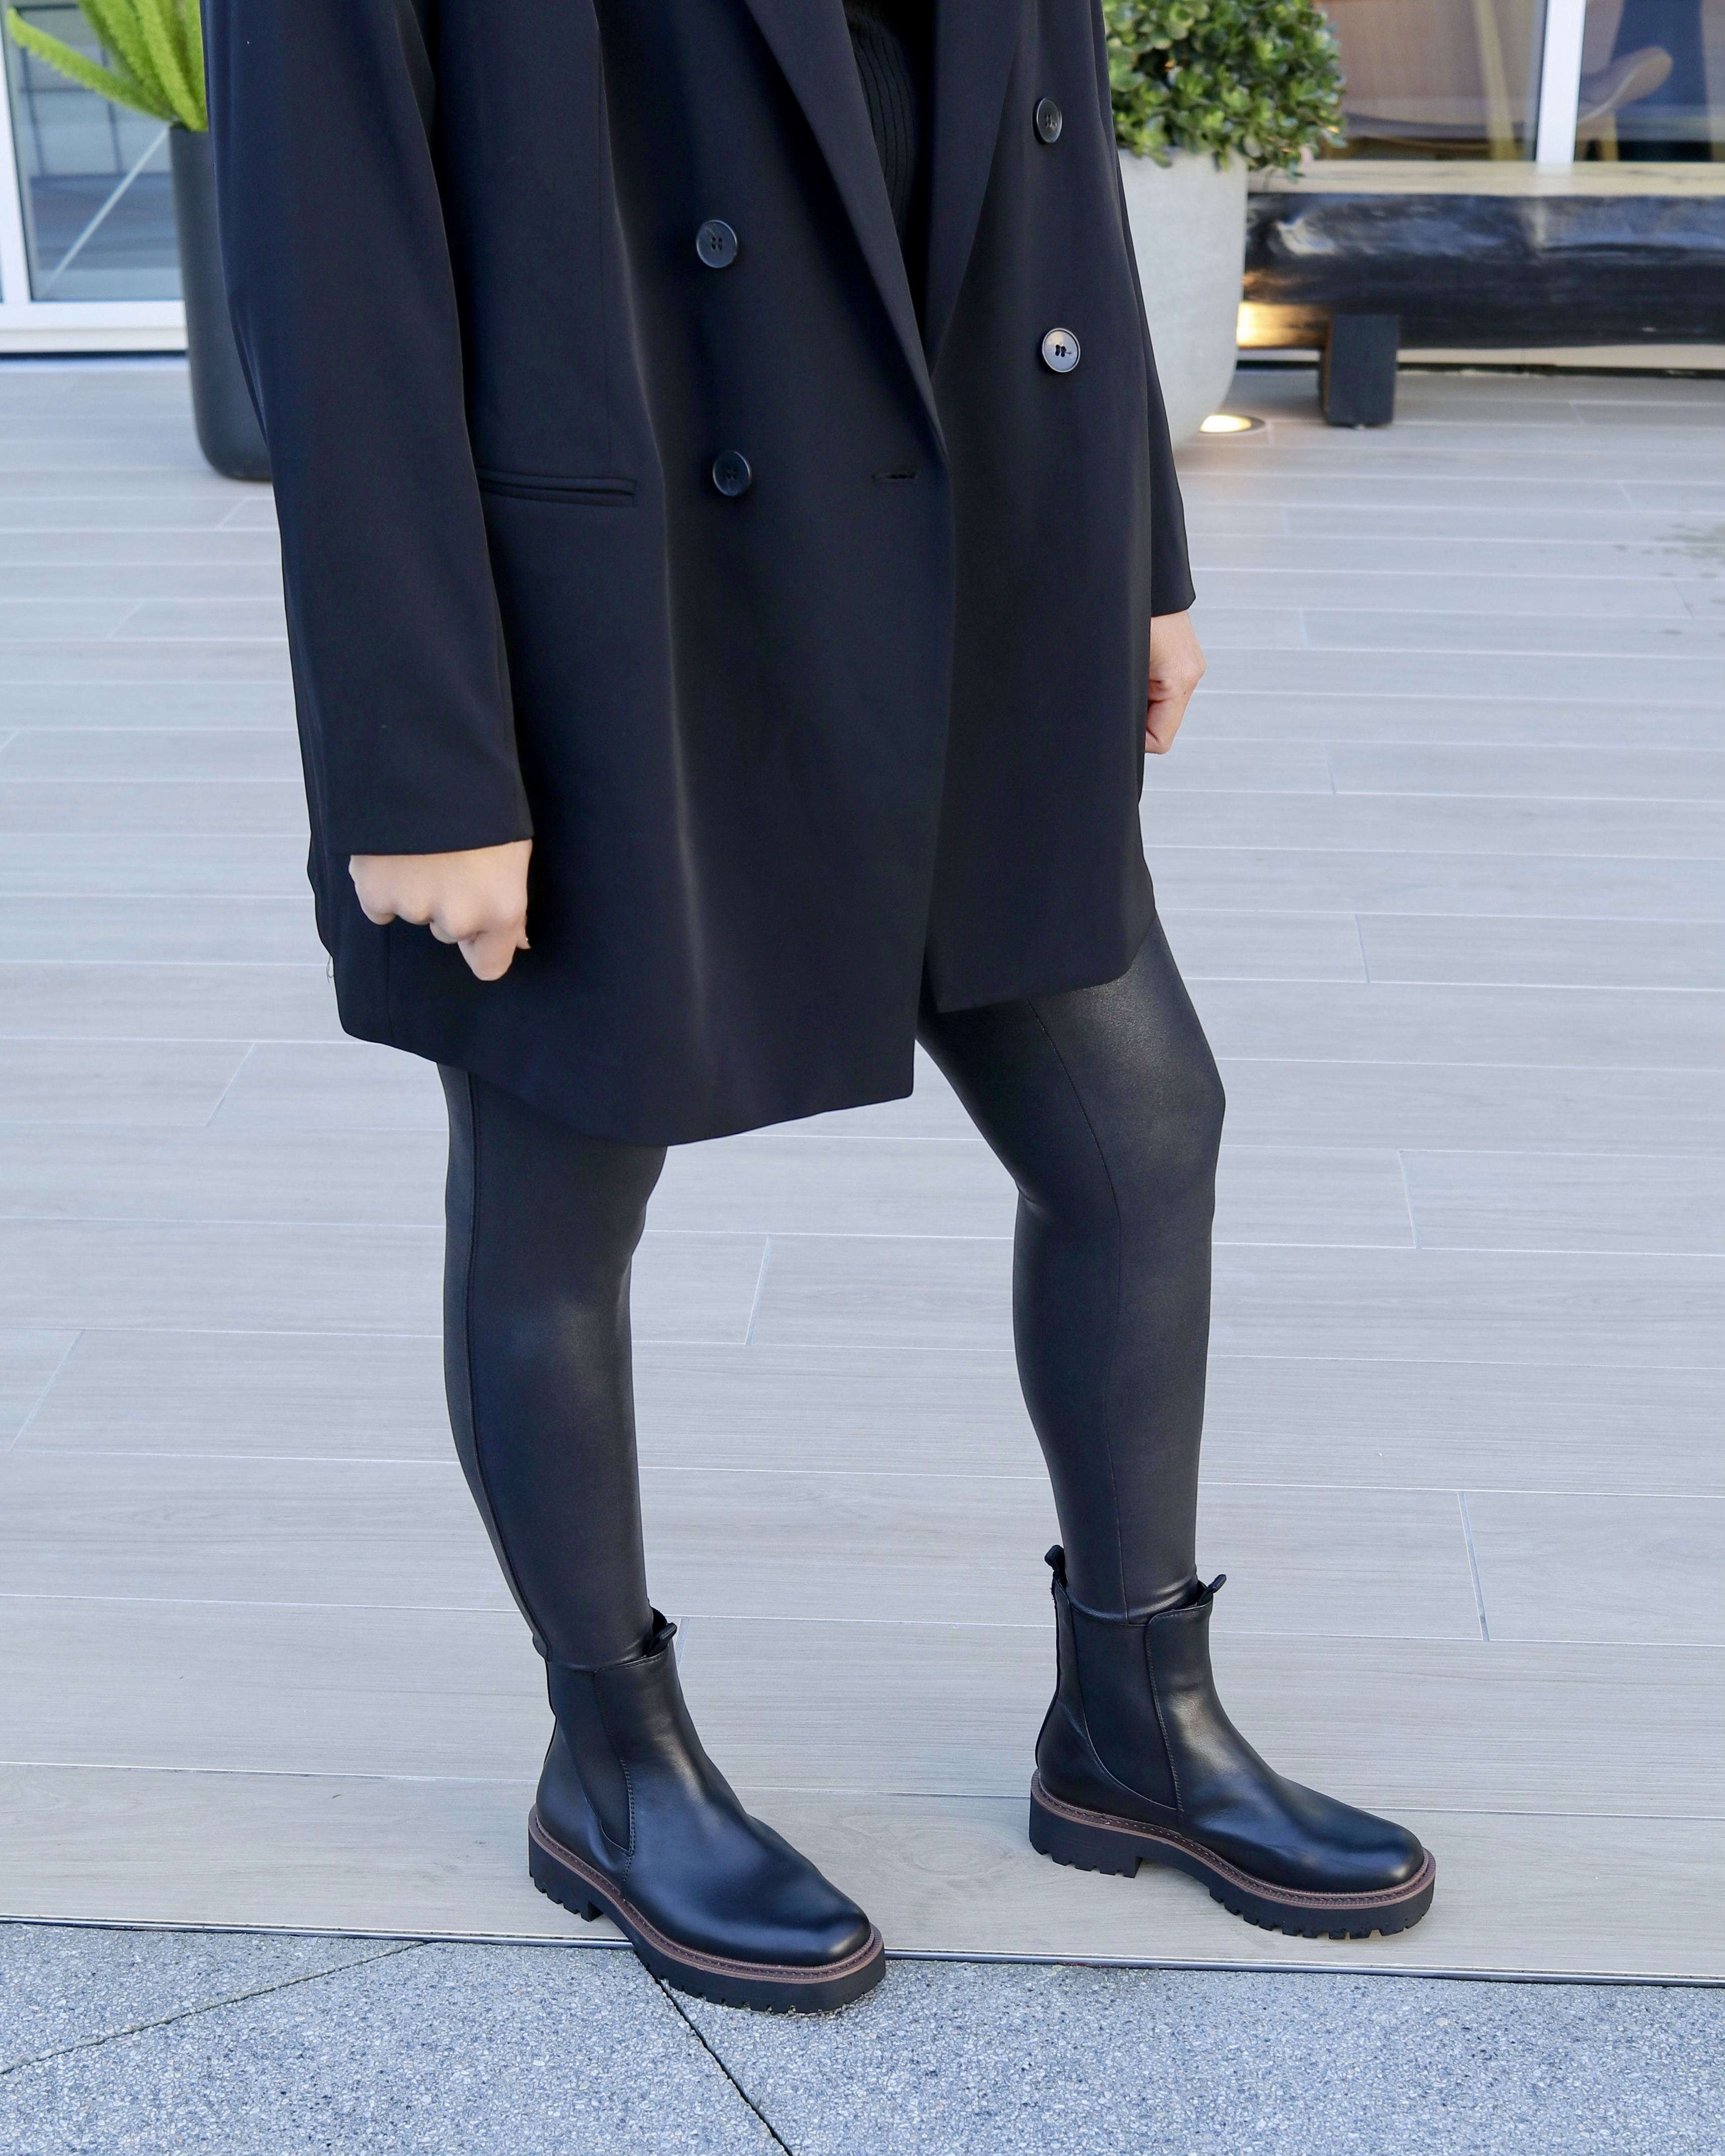 Spanx faux leather leggings with Chelsea boots outfit, oversized blazer with faux leather leggings outfit